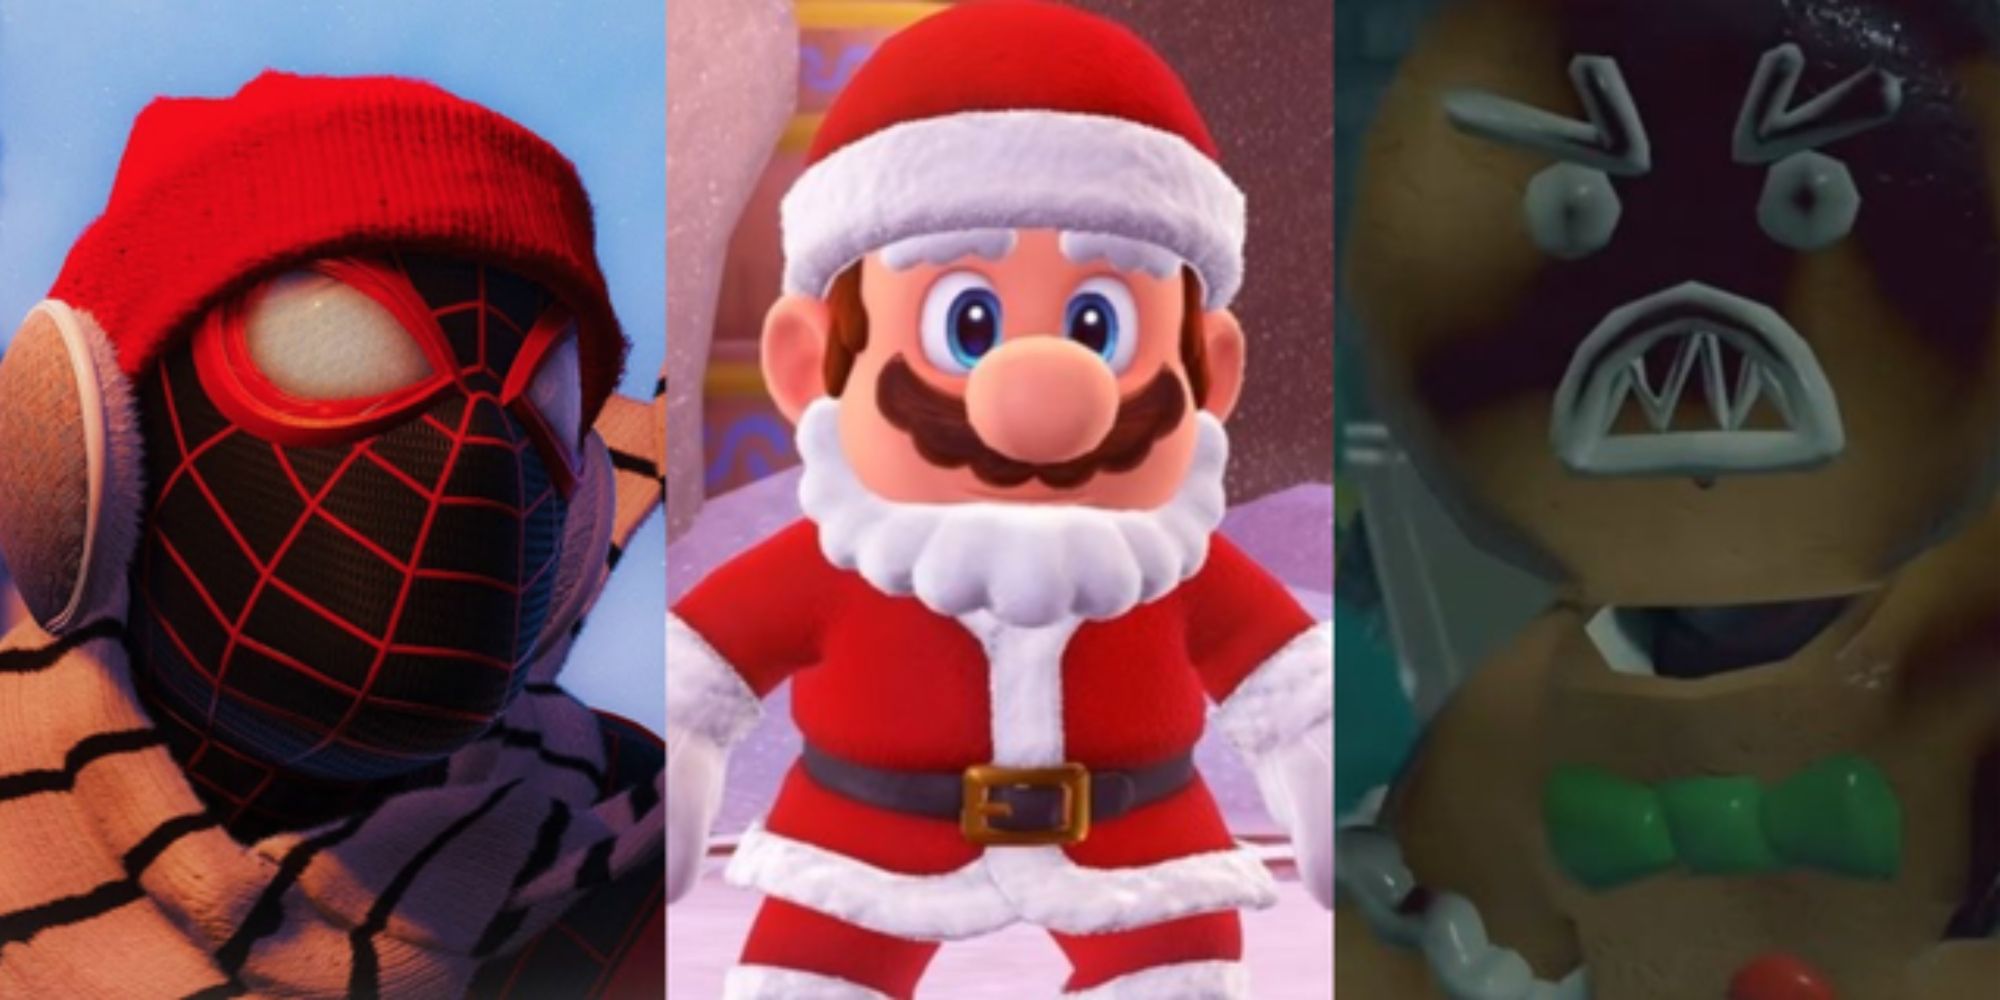 Games to get you into the Holida Spirit including Mario Odyessey, Spider-Man: Miles Morales and Saints Row 4